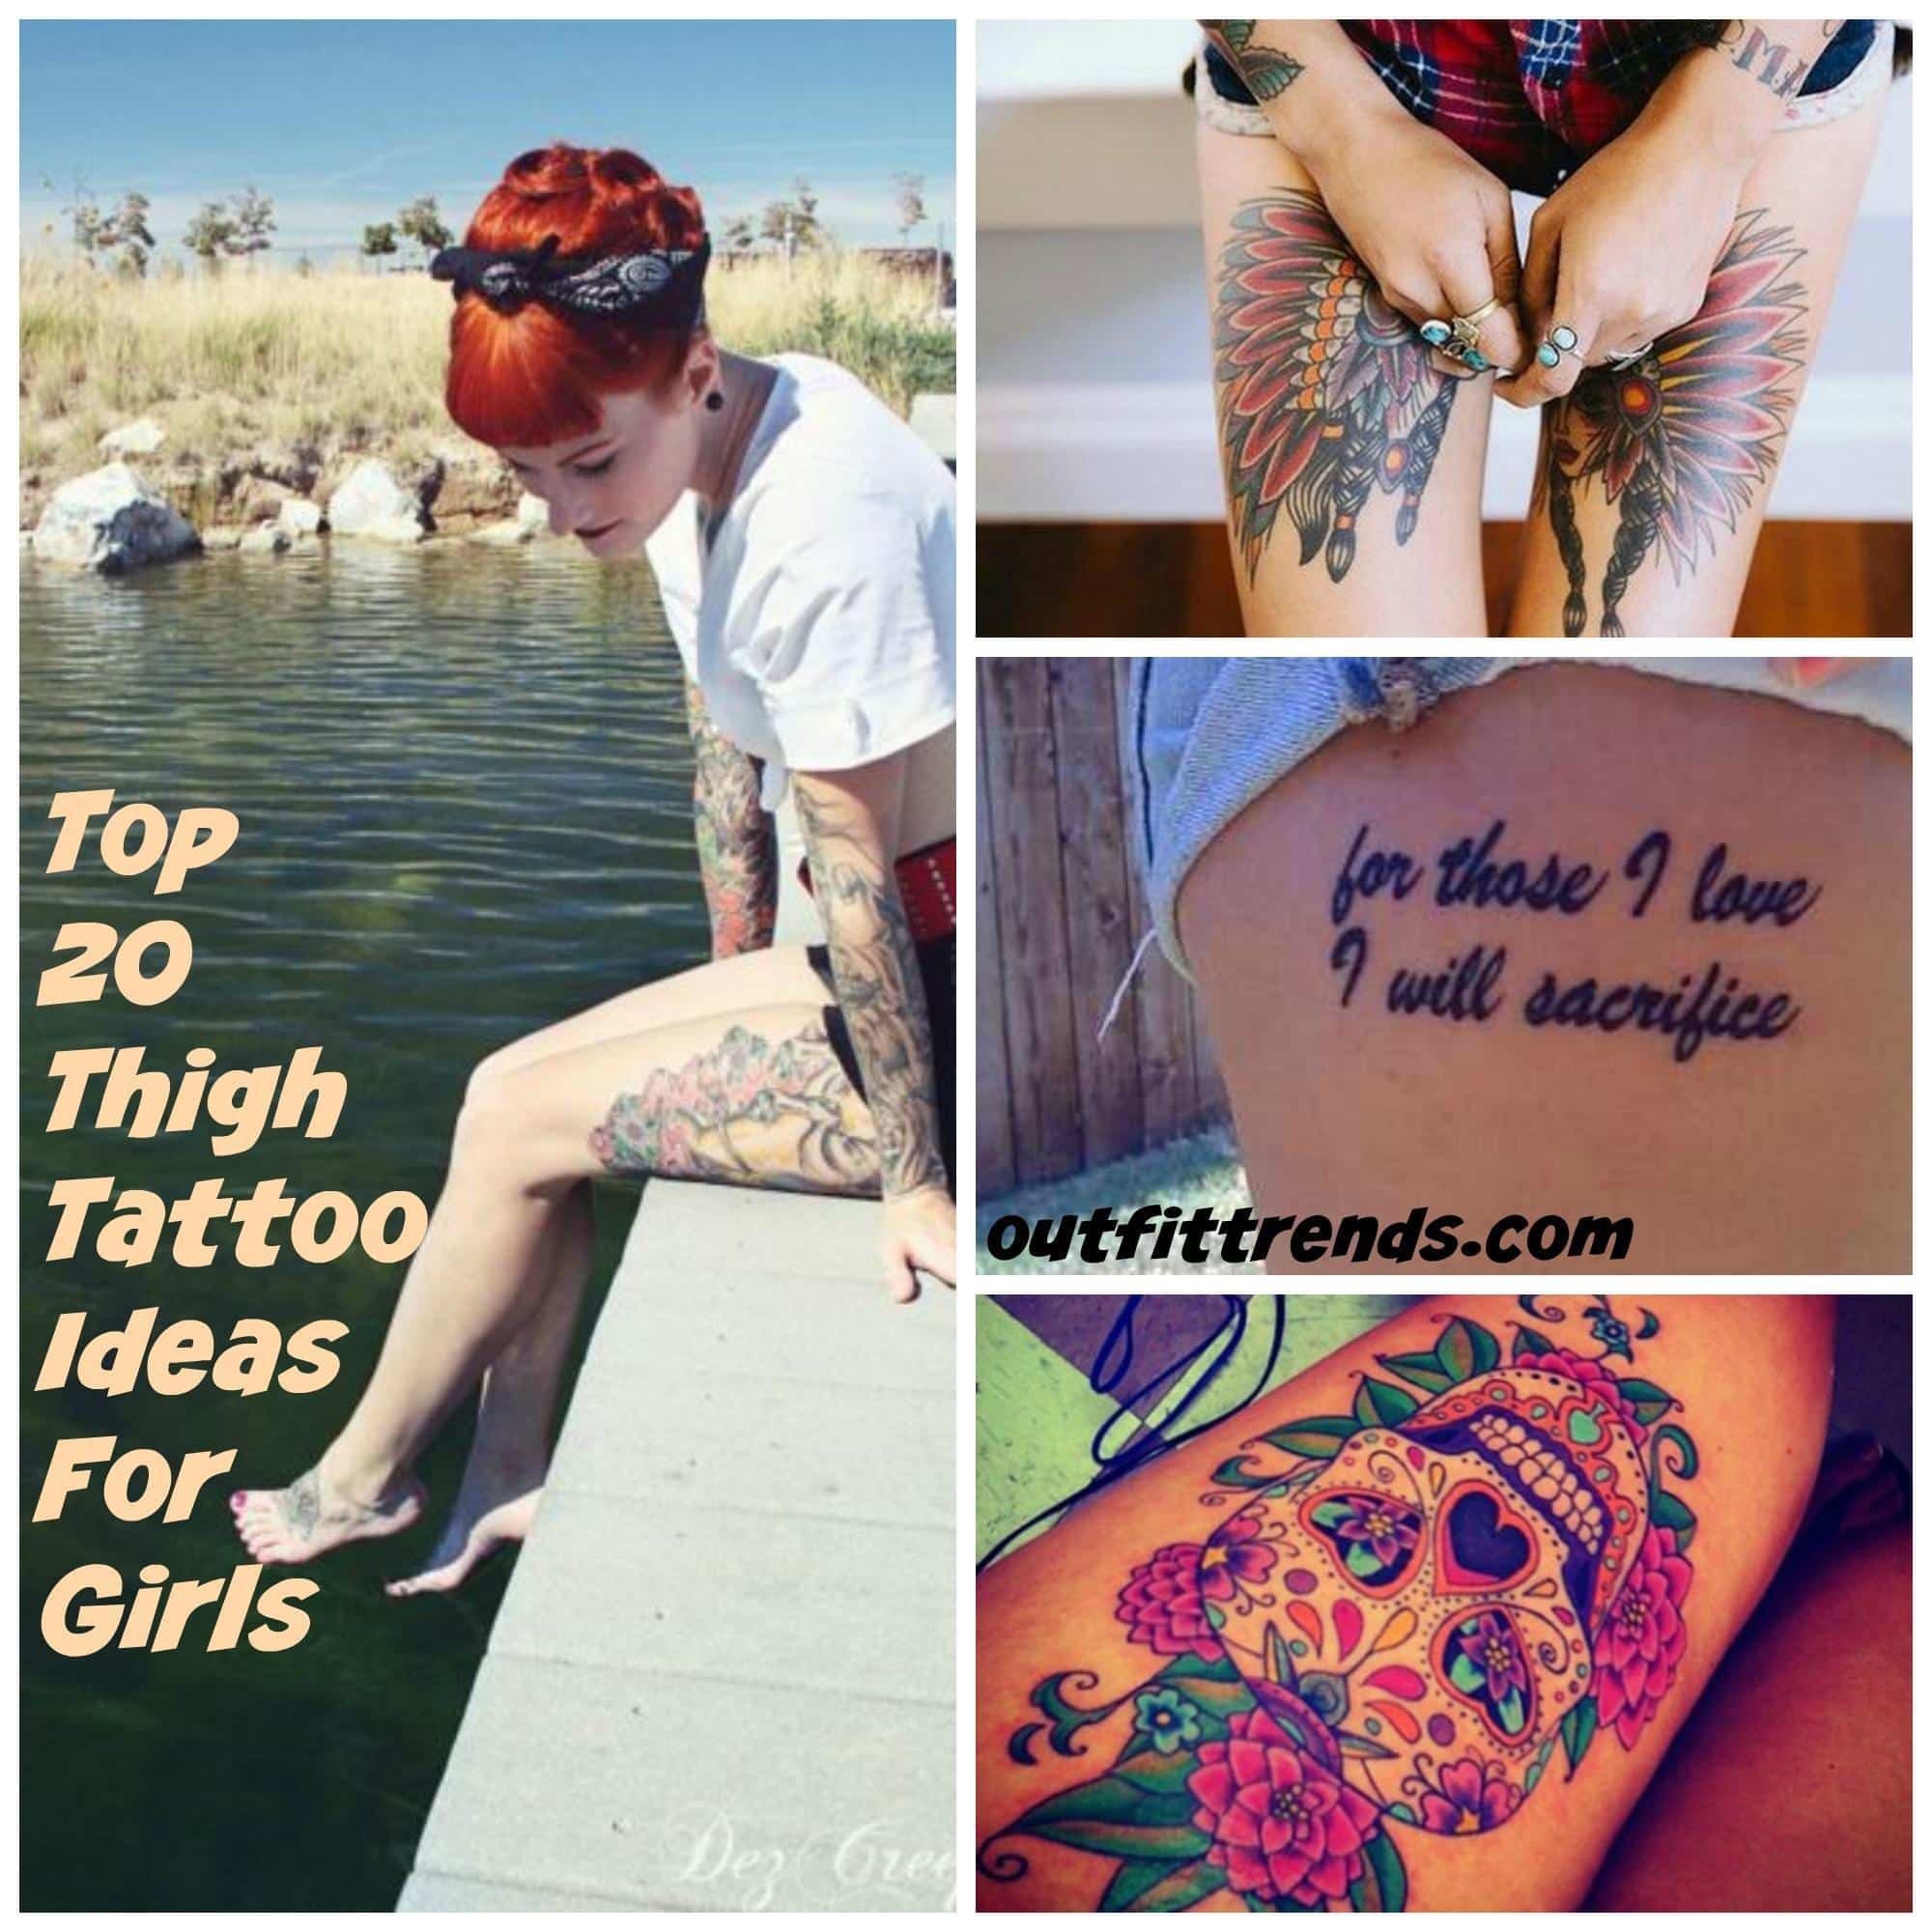 20 Famous Thigh Tattoo Designs you Should Try